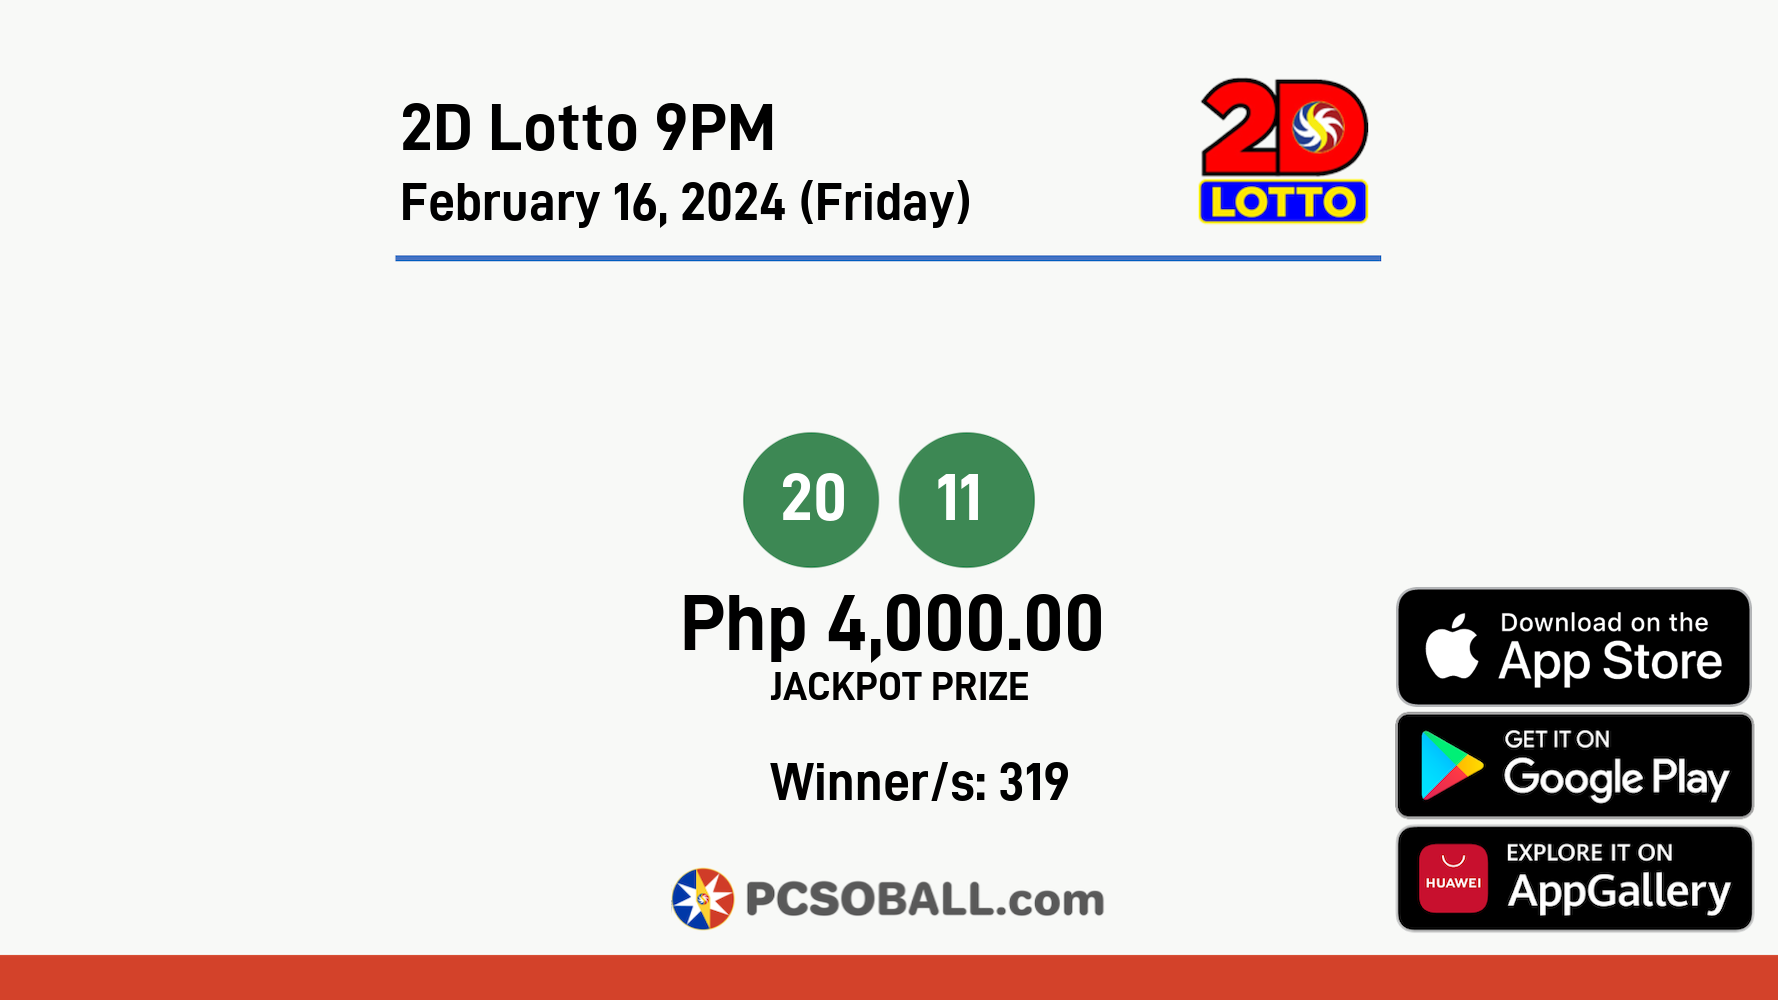 2D Lotto 9PM February 16, 2024 (Friday) Result